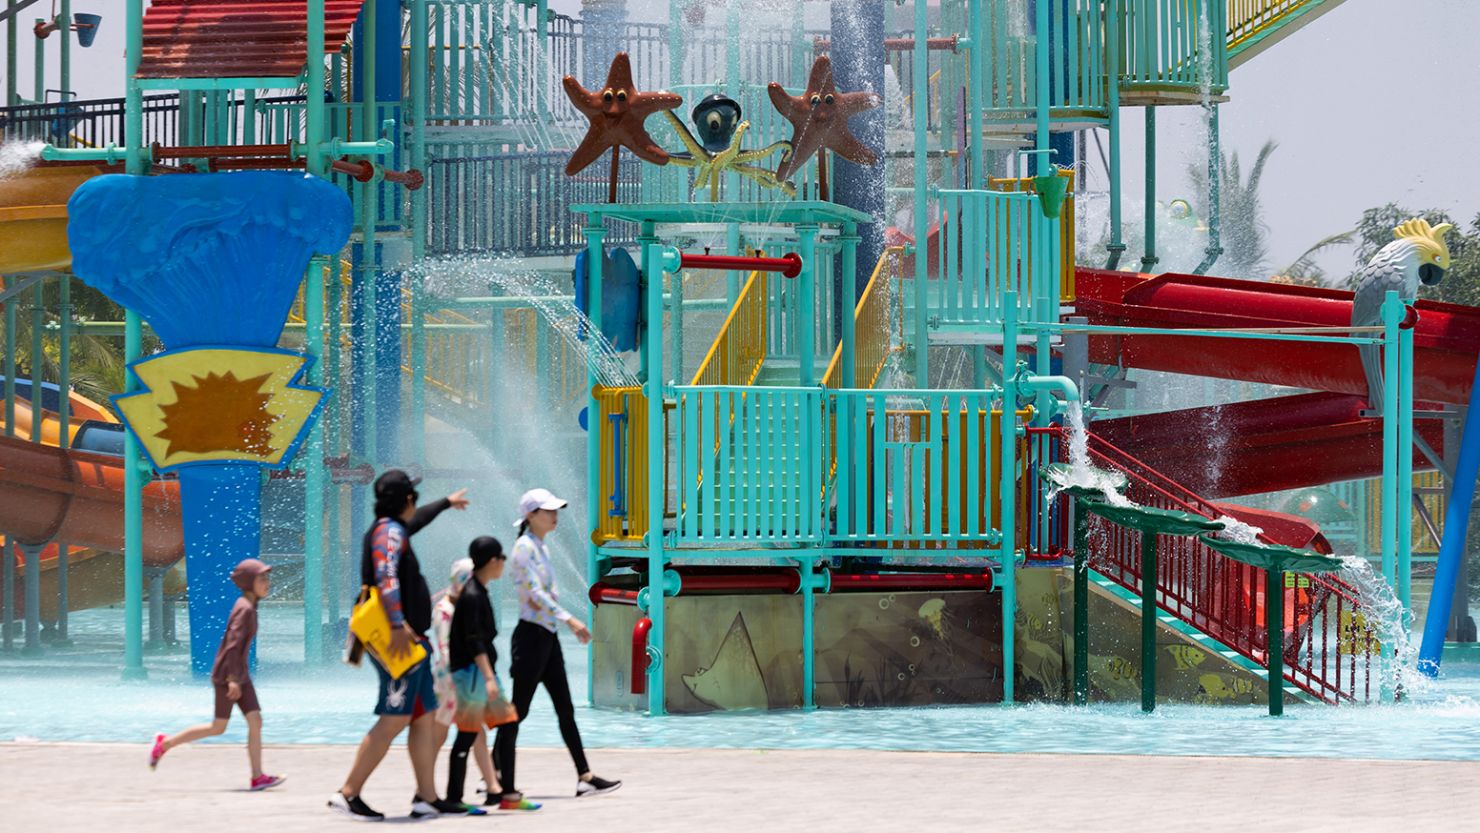 Visitors cool off at an amusement park in Hoi An, Vietnam. The country marked its hottest day ever Saturday.  